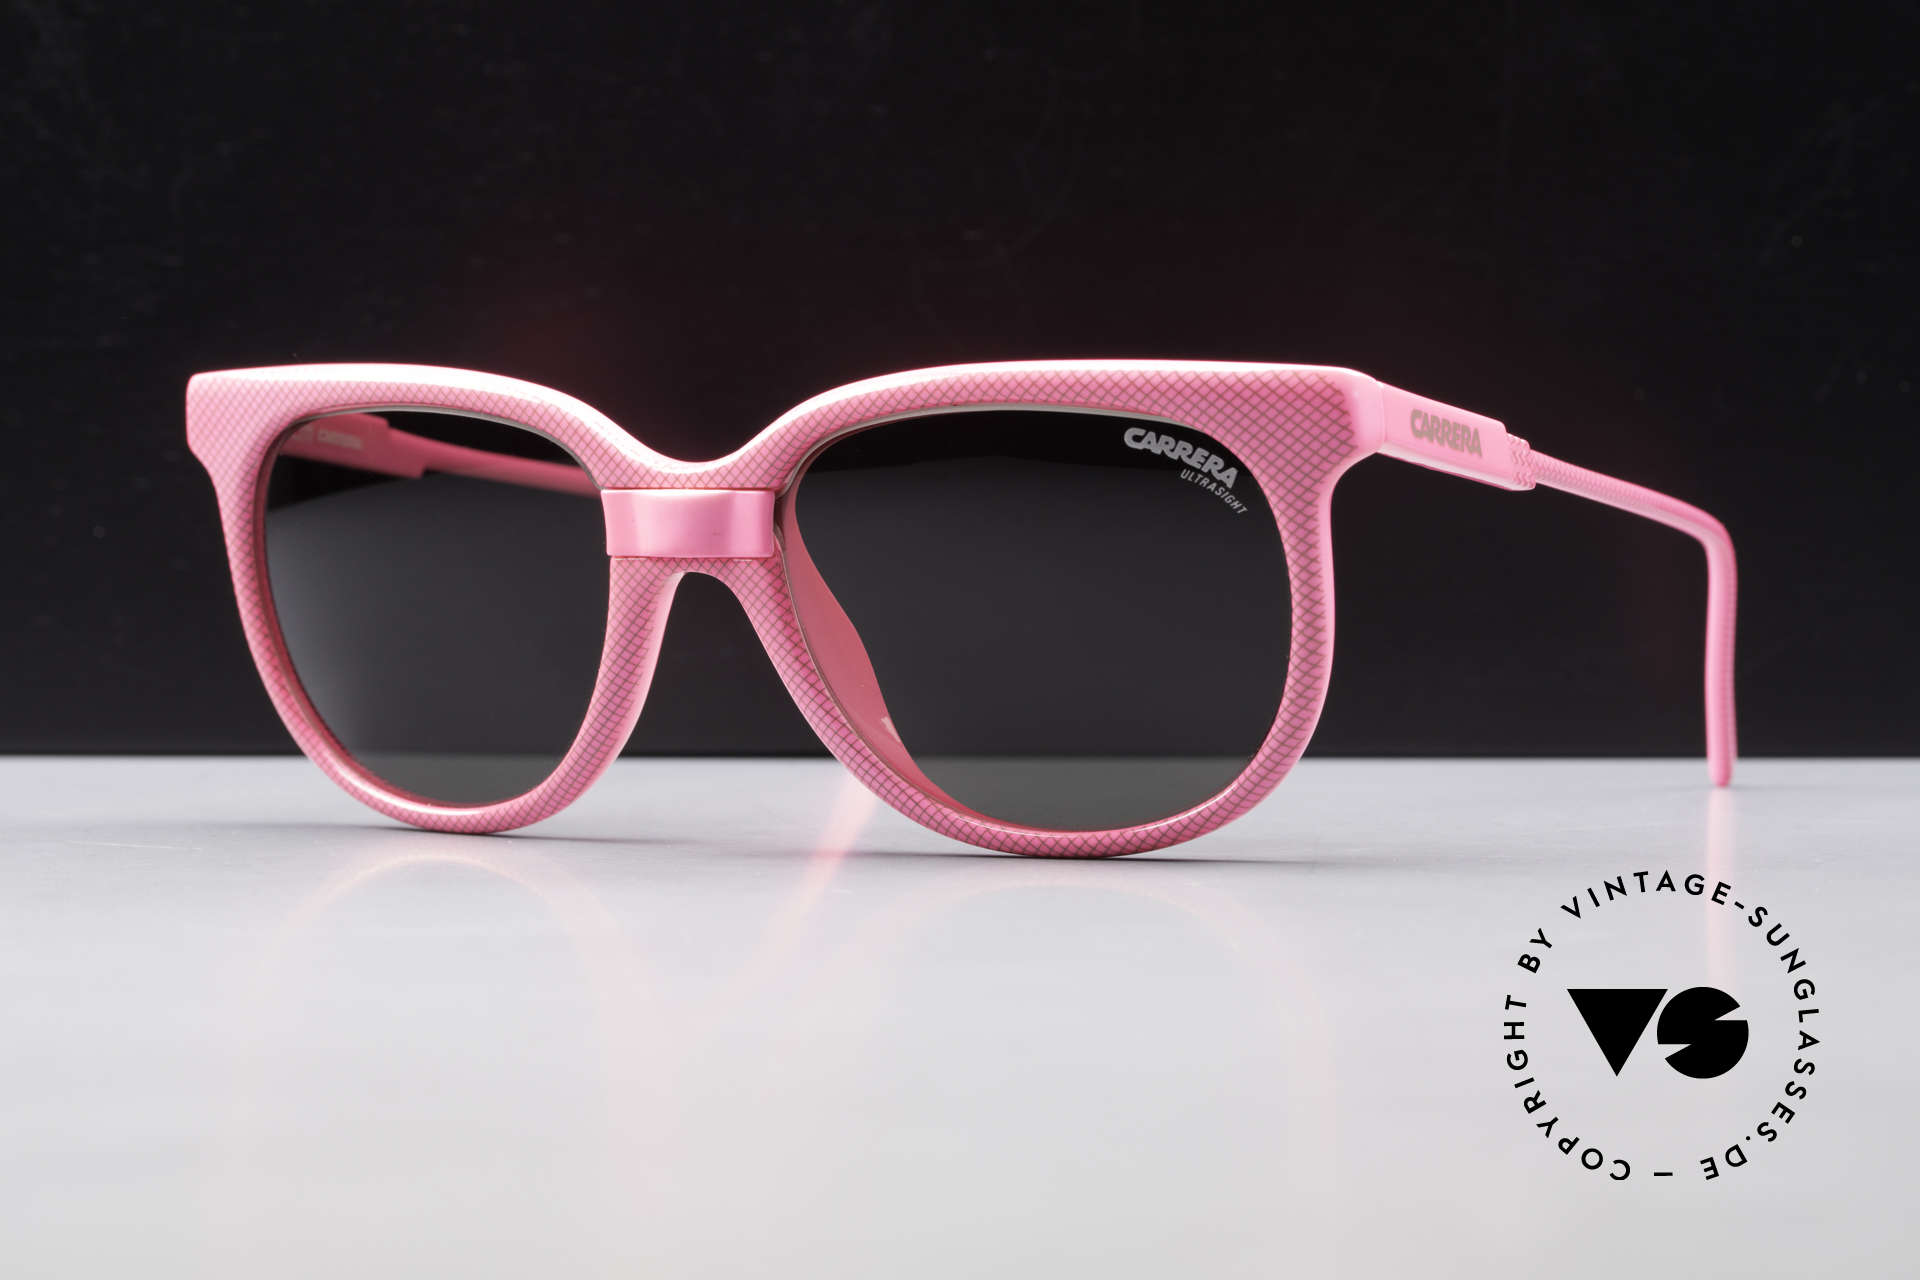 Carrera 5426 Pink Ladies Sports Sunglasses, state-of-the-art lenses (3 sets) & with orig. case, Made for Women